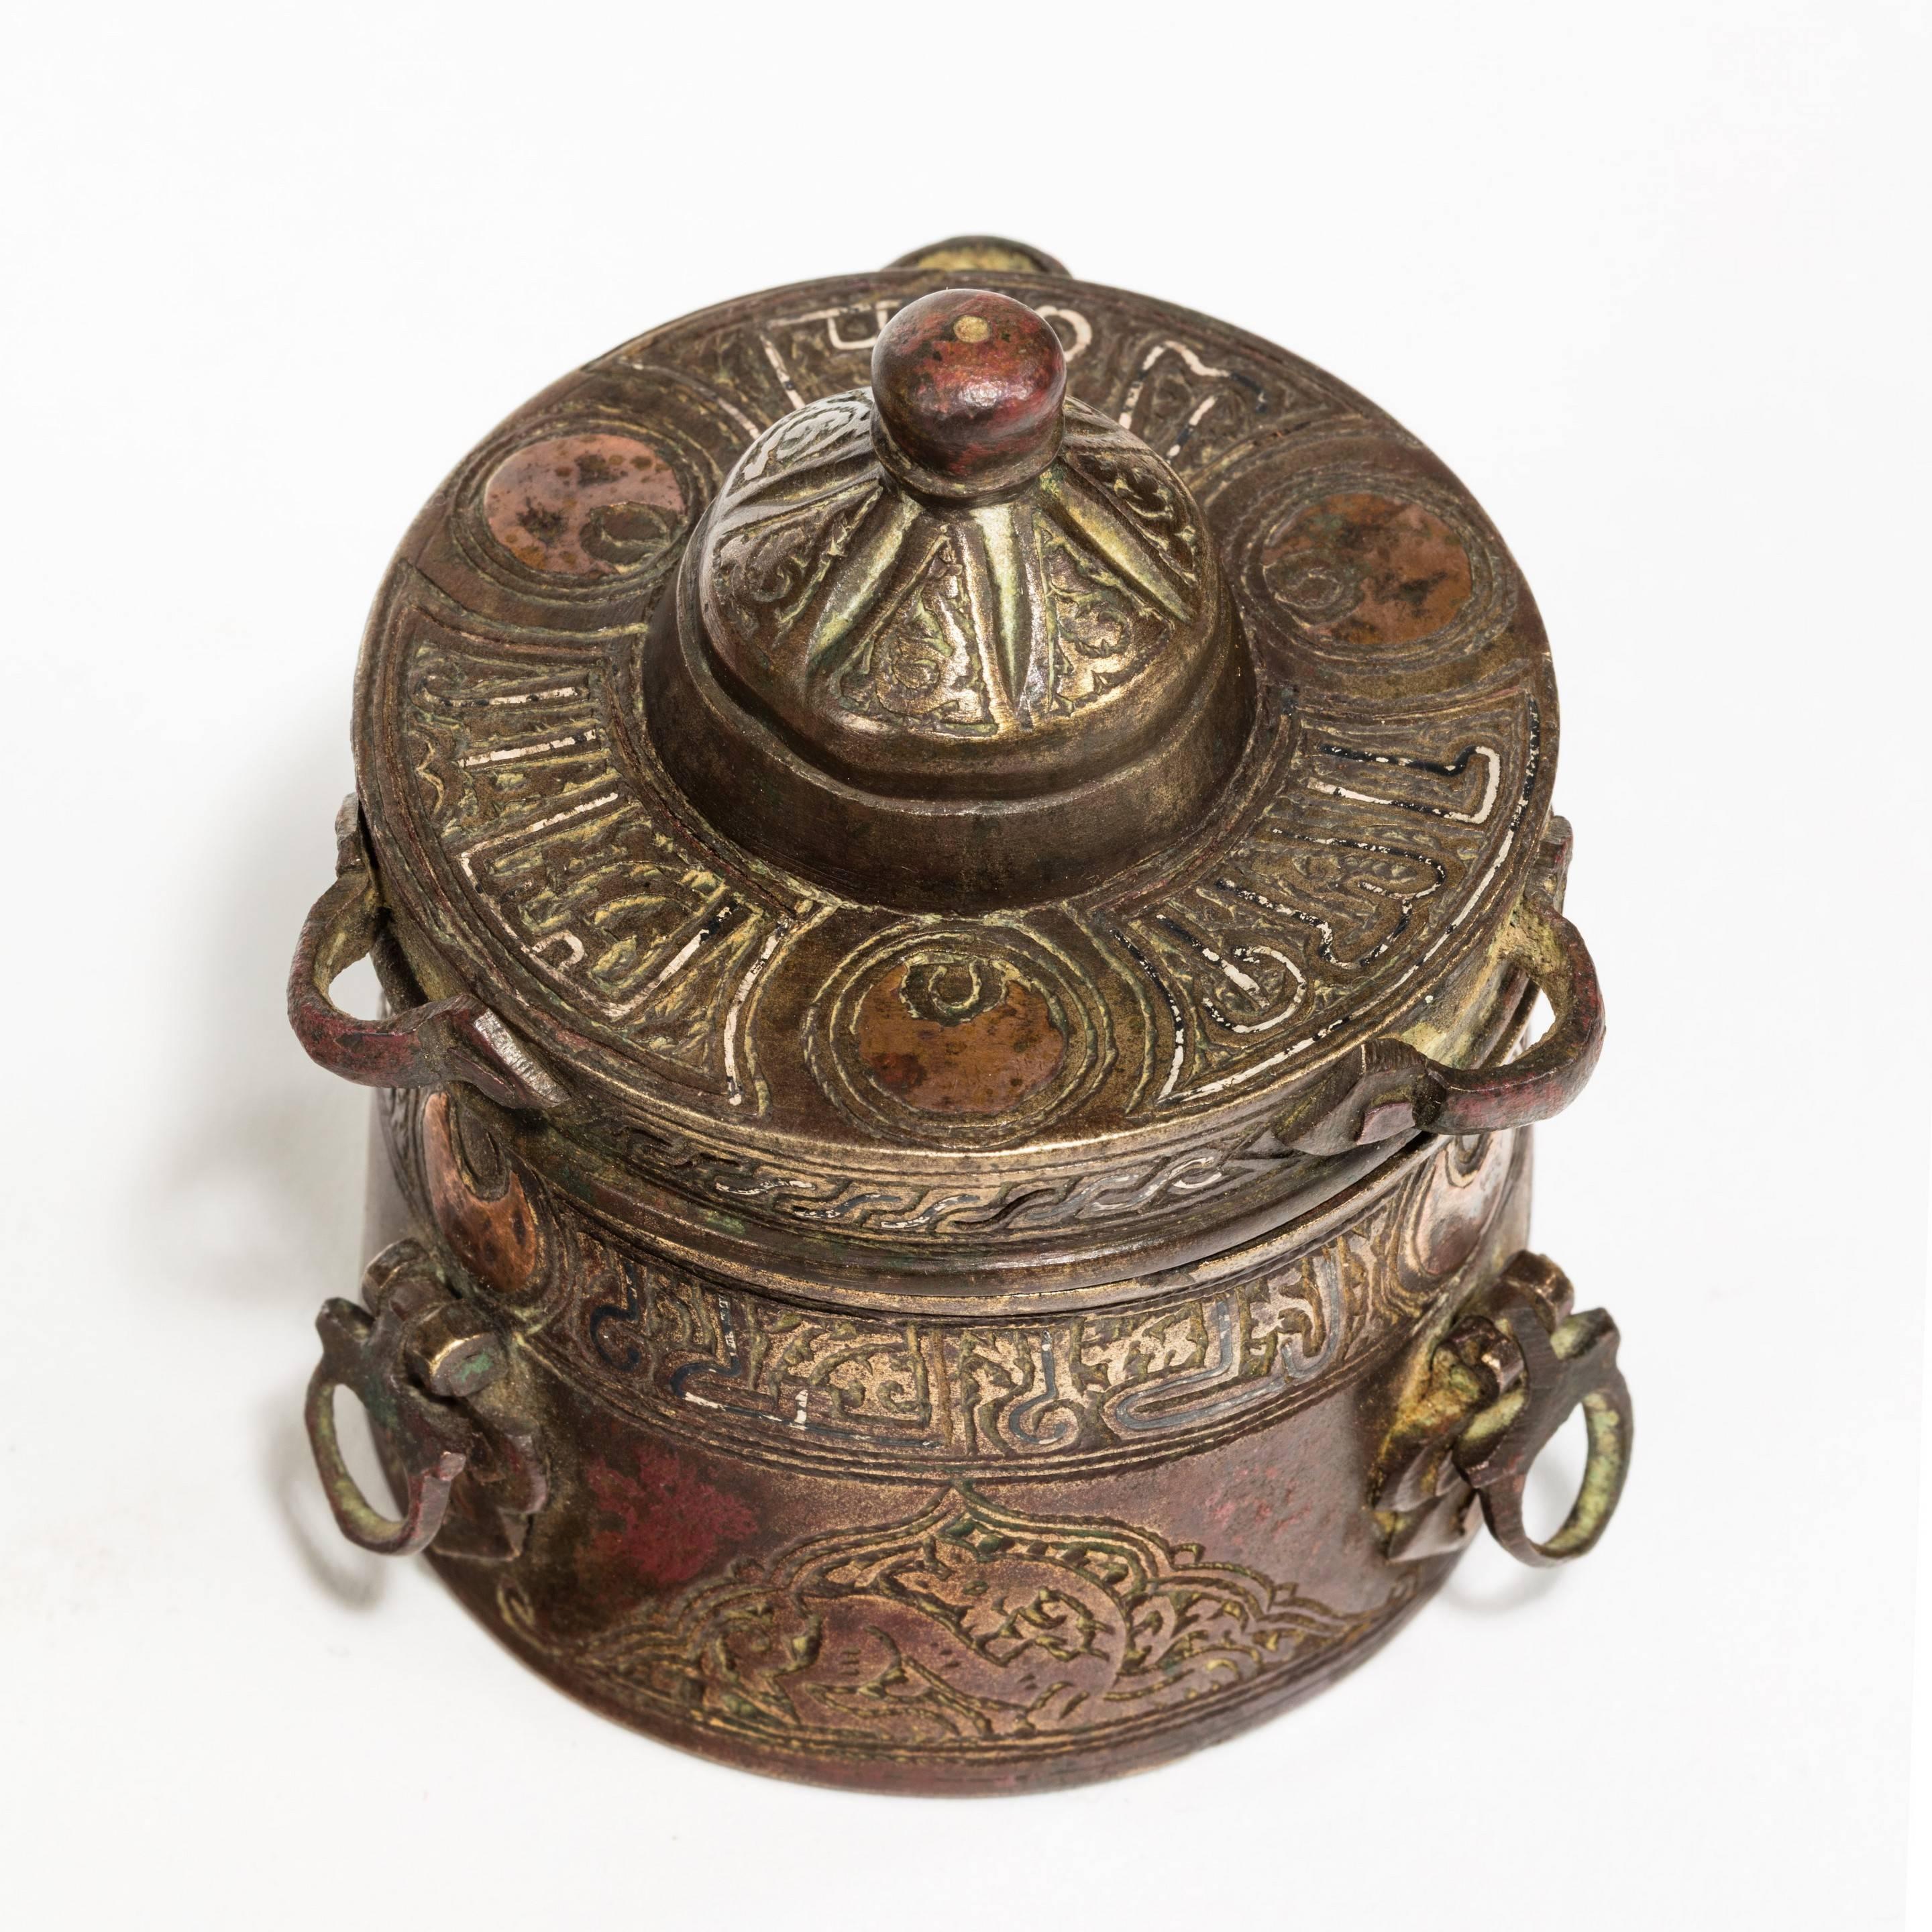 A Khorasan bronze inkwell, of typical form with three small handles and a lobed cover (hinge missing), inlaid in copper and silver with bands of calligraphy and figural roundels, 12th century.